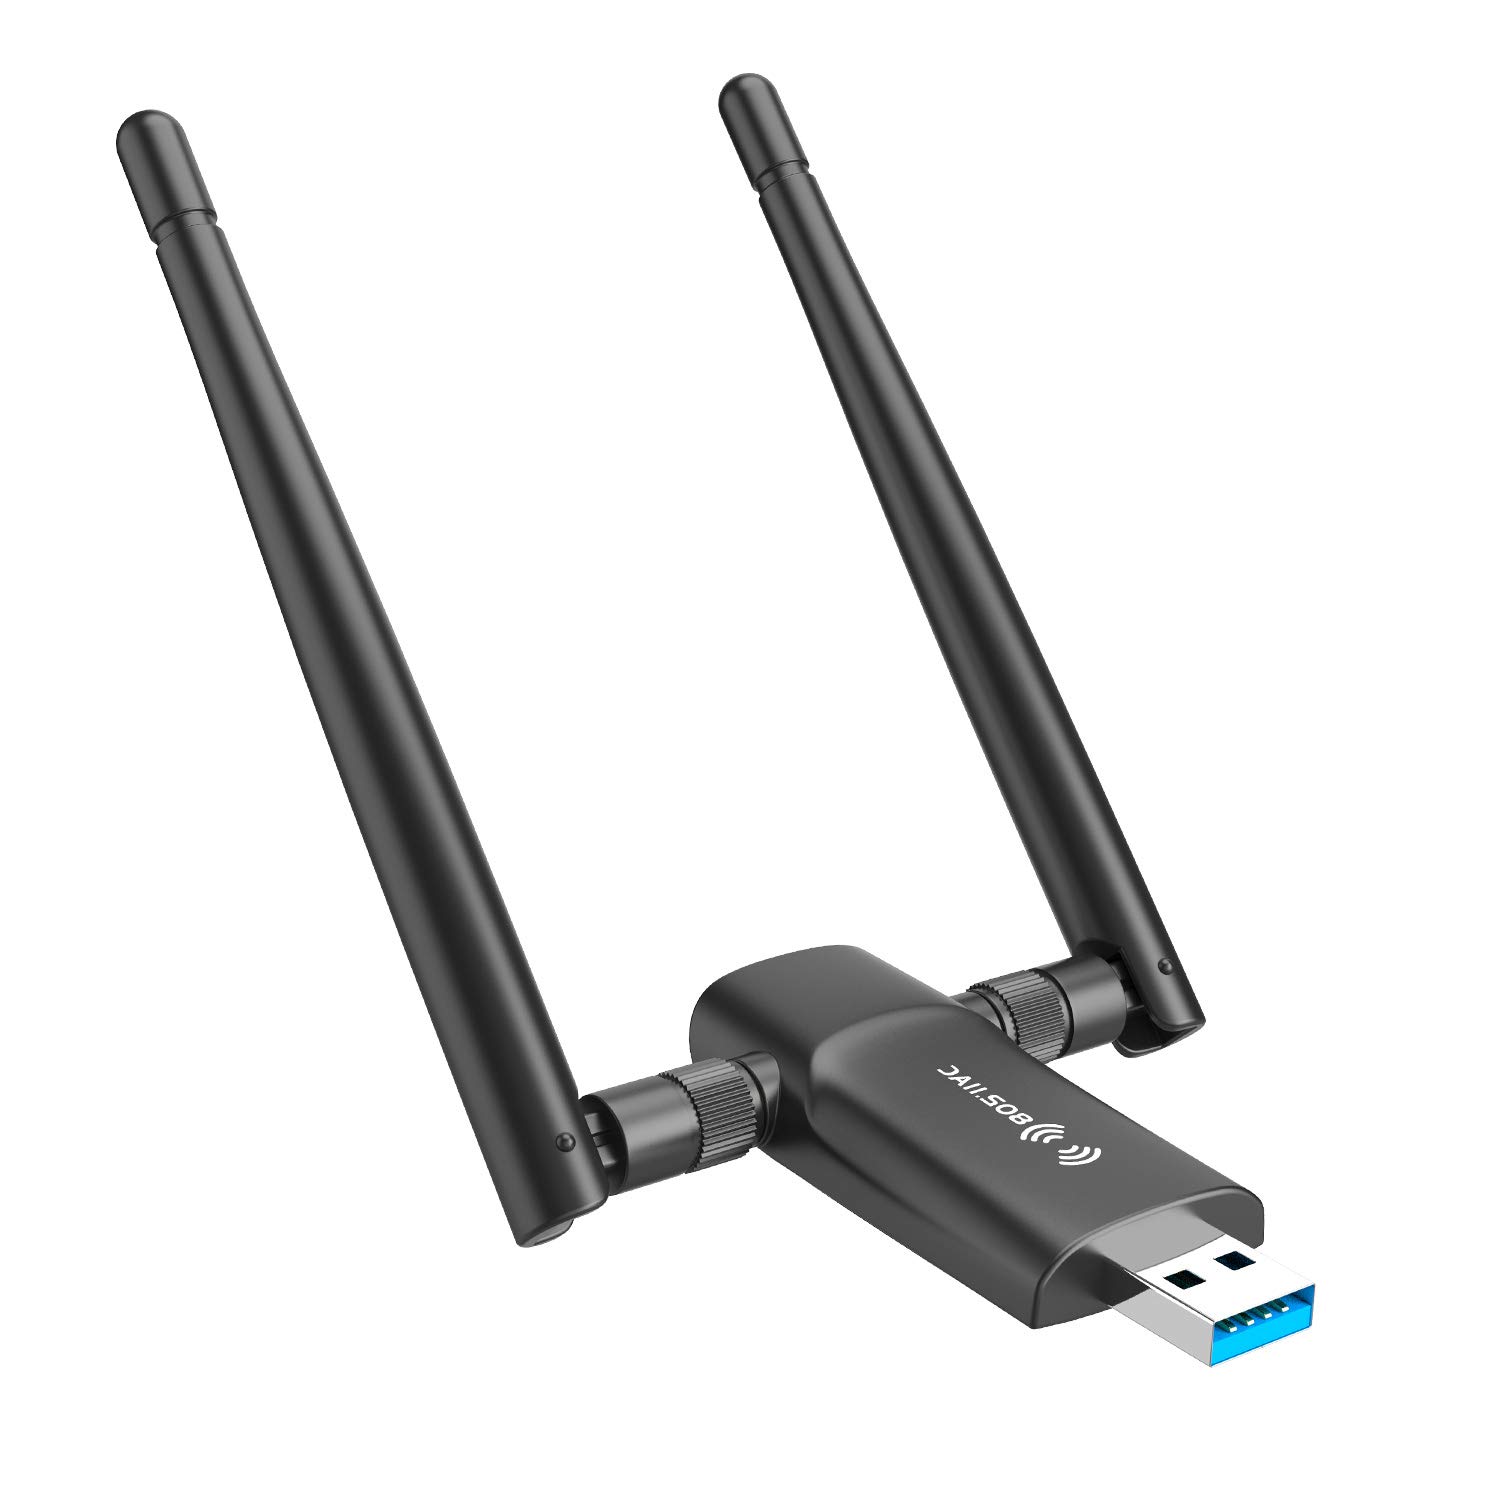 Determine the compatibility of your laptop with external Wi-Fi adapters.
Research and purchase a compatible external Wi-Fi adapter if necessary.